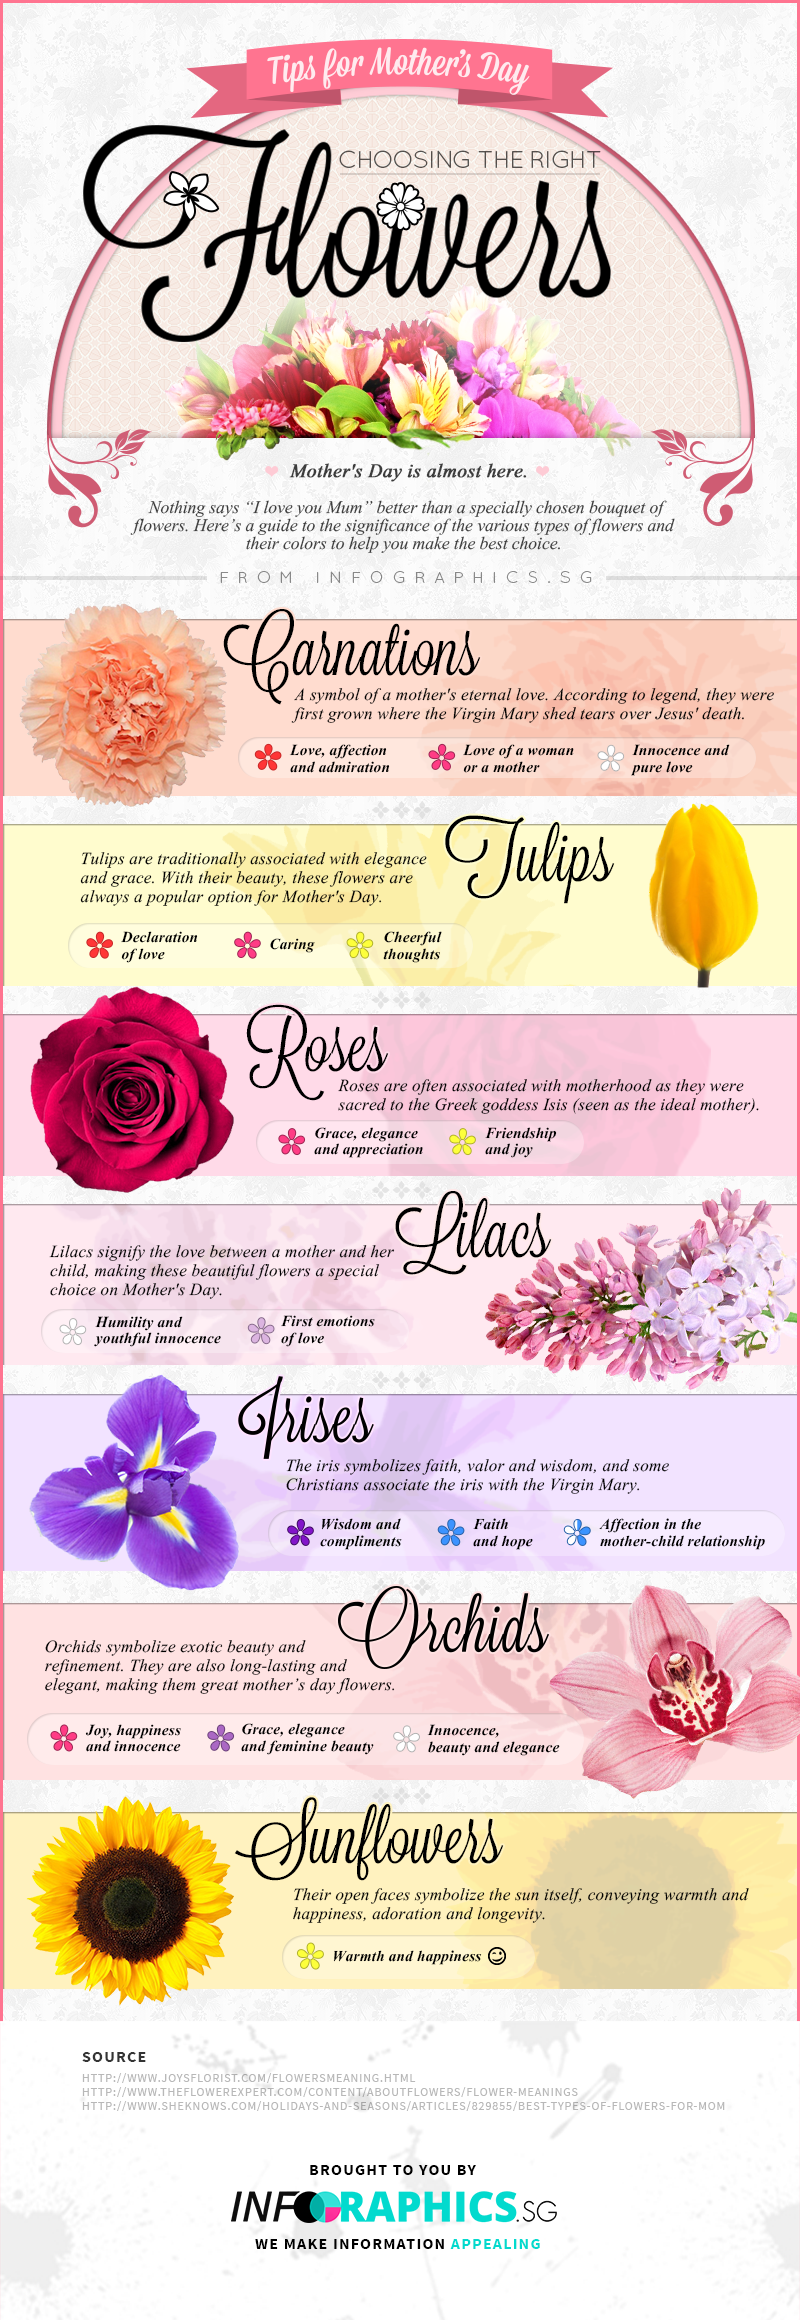 Choosing the Right Flowers for Mother's Day